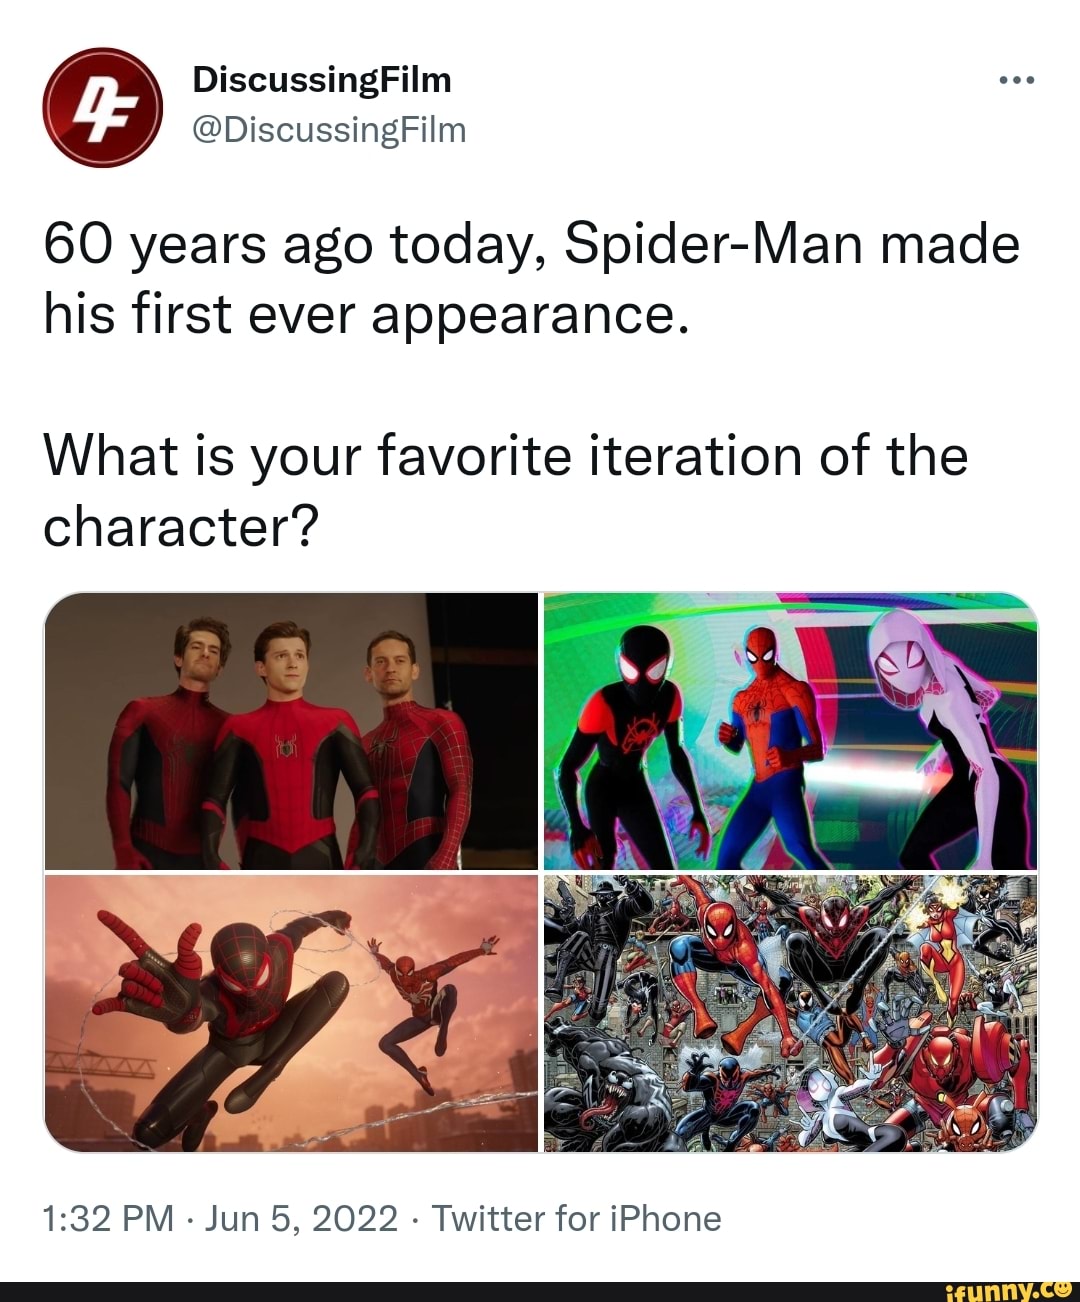 DiscussingFilm @DiscussingFilm 60 years ago today, Spider-Man made his